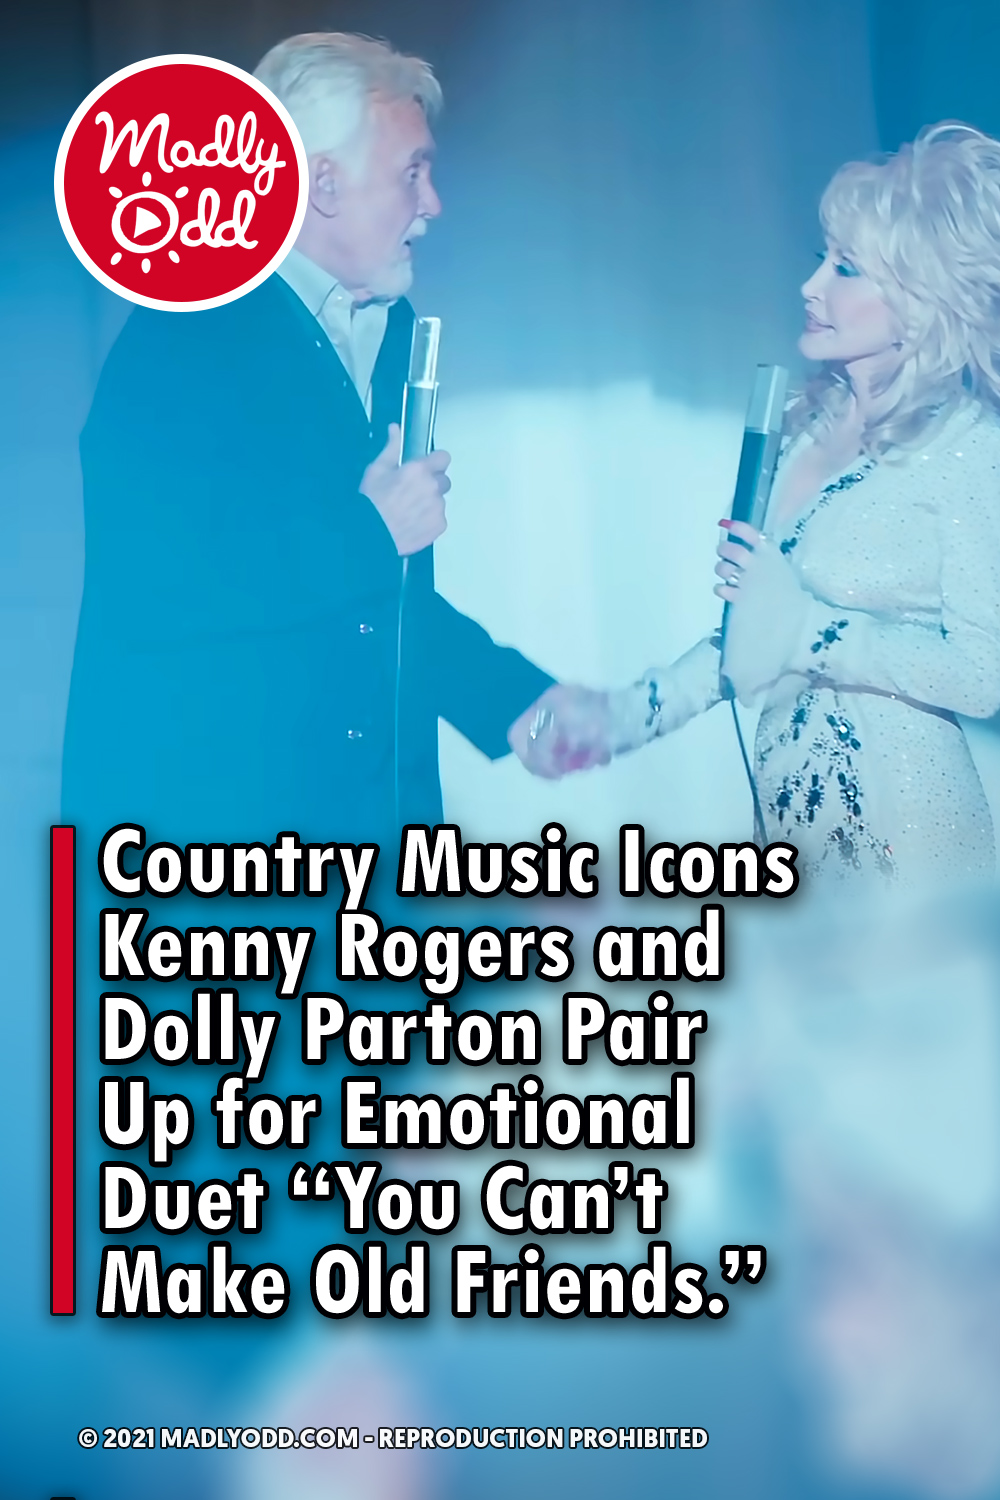 Country Music Icons Kenny Rogers and Dolly Parton Pair Up for Emotional Duet “You Can’t Make Old Friends.”